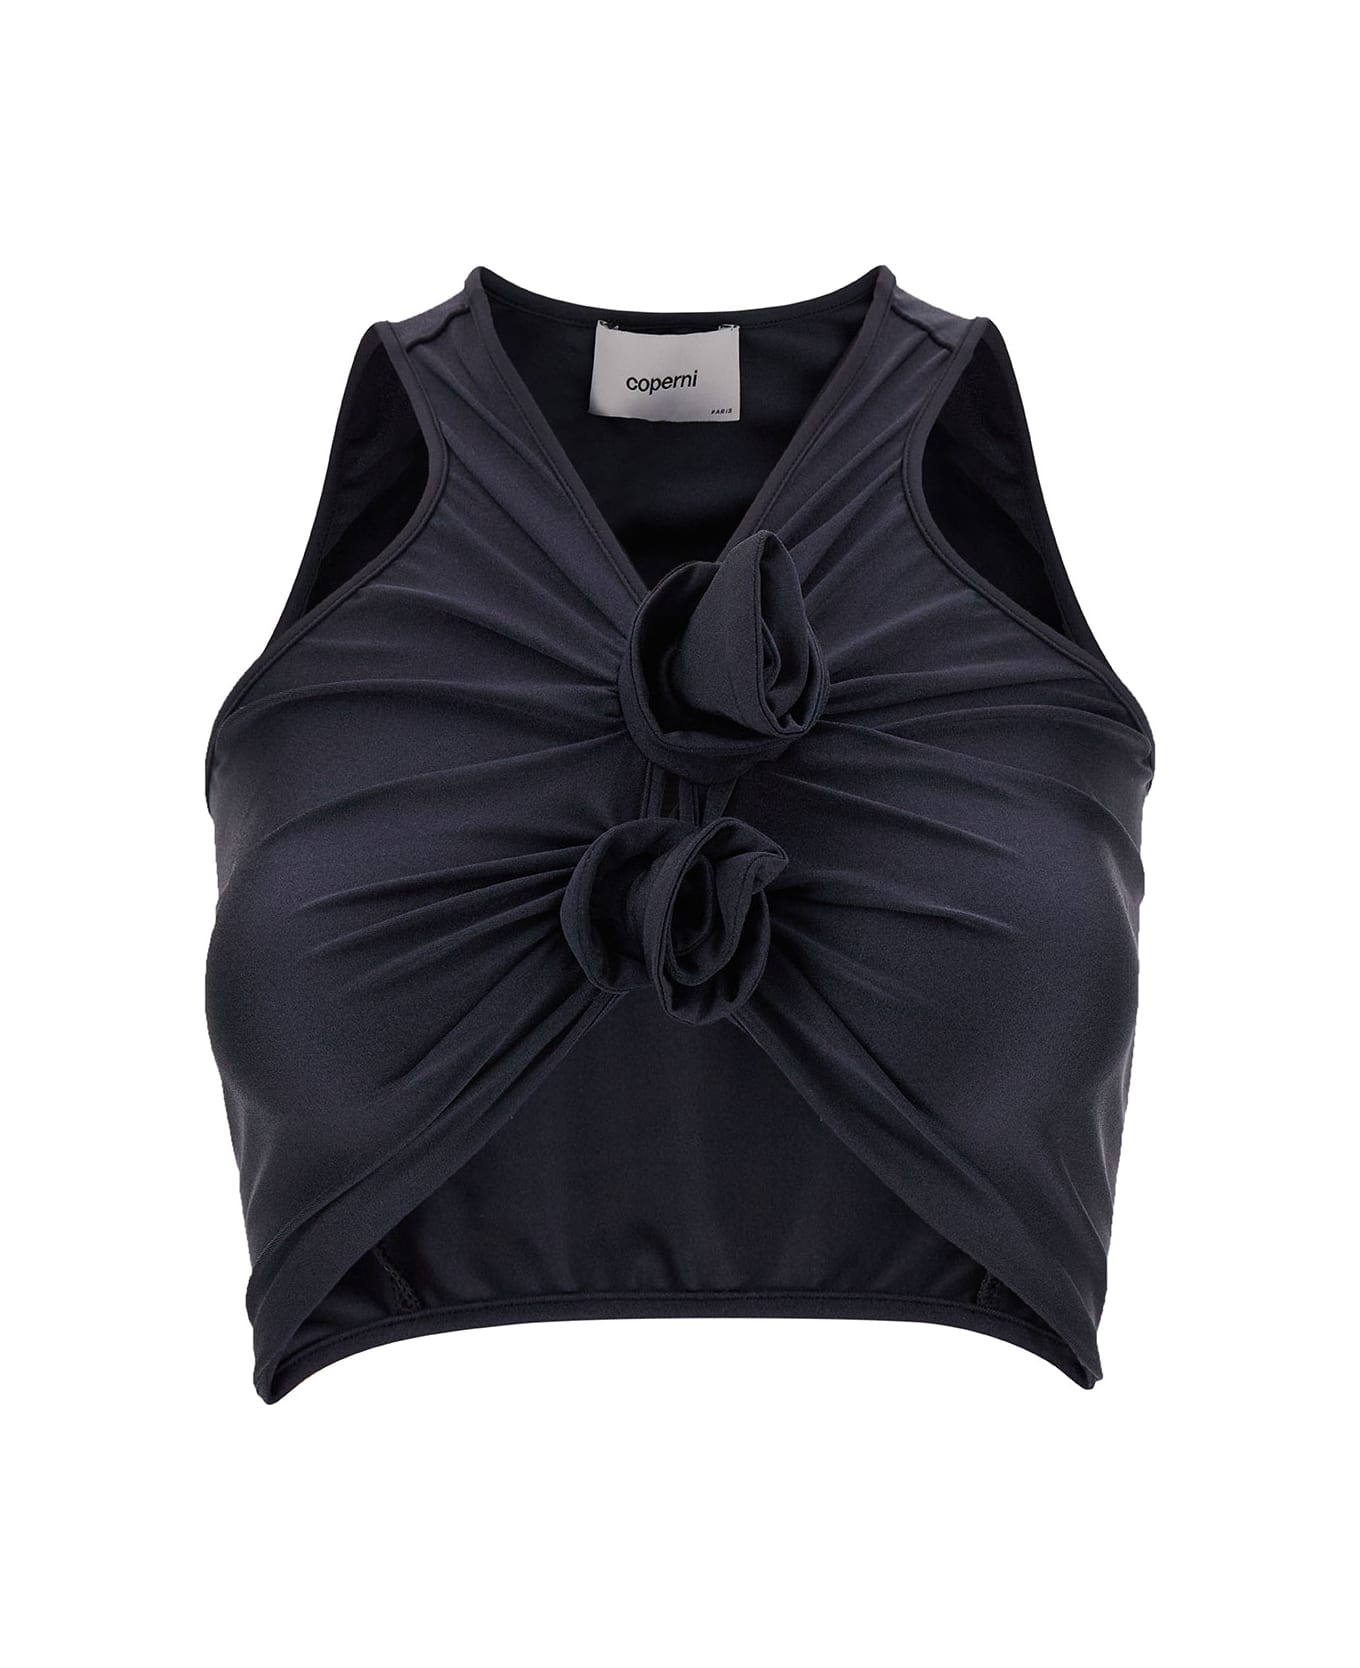 Coperni Black Crop Top With Roses Details In Stretch Satin Woman - Black